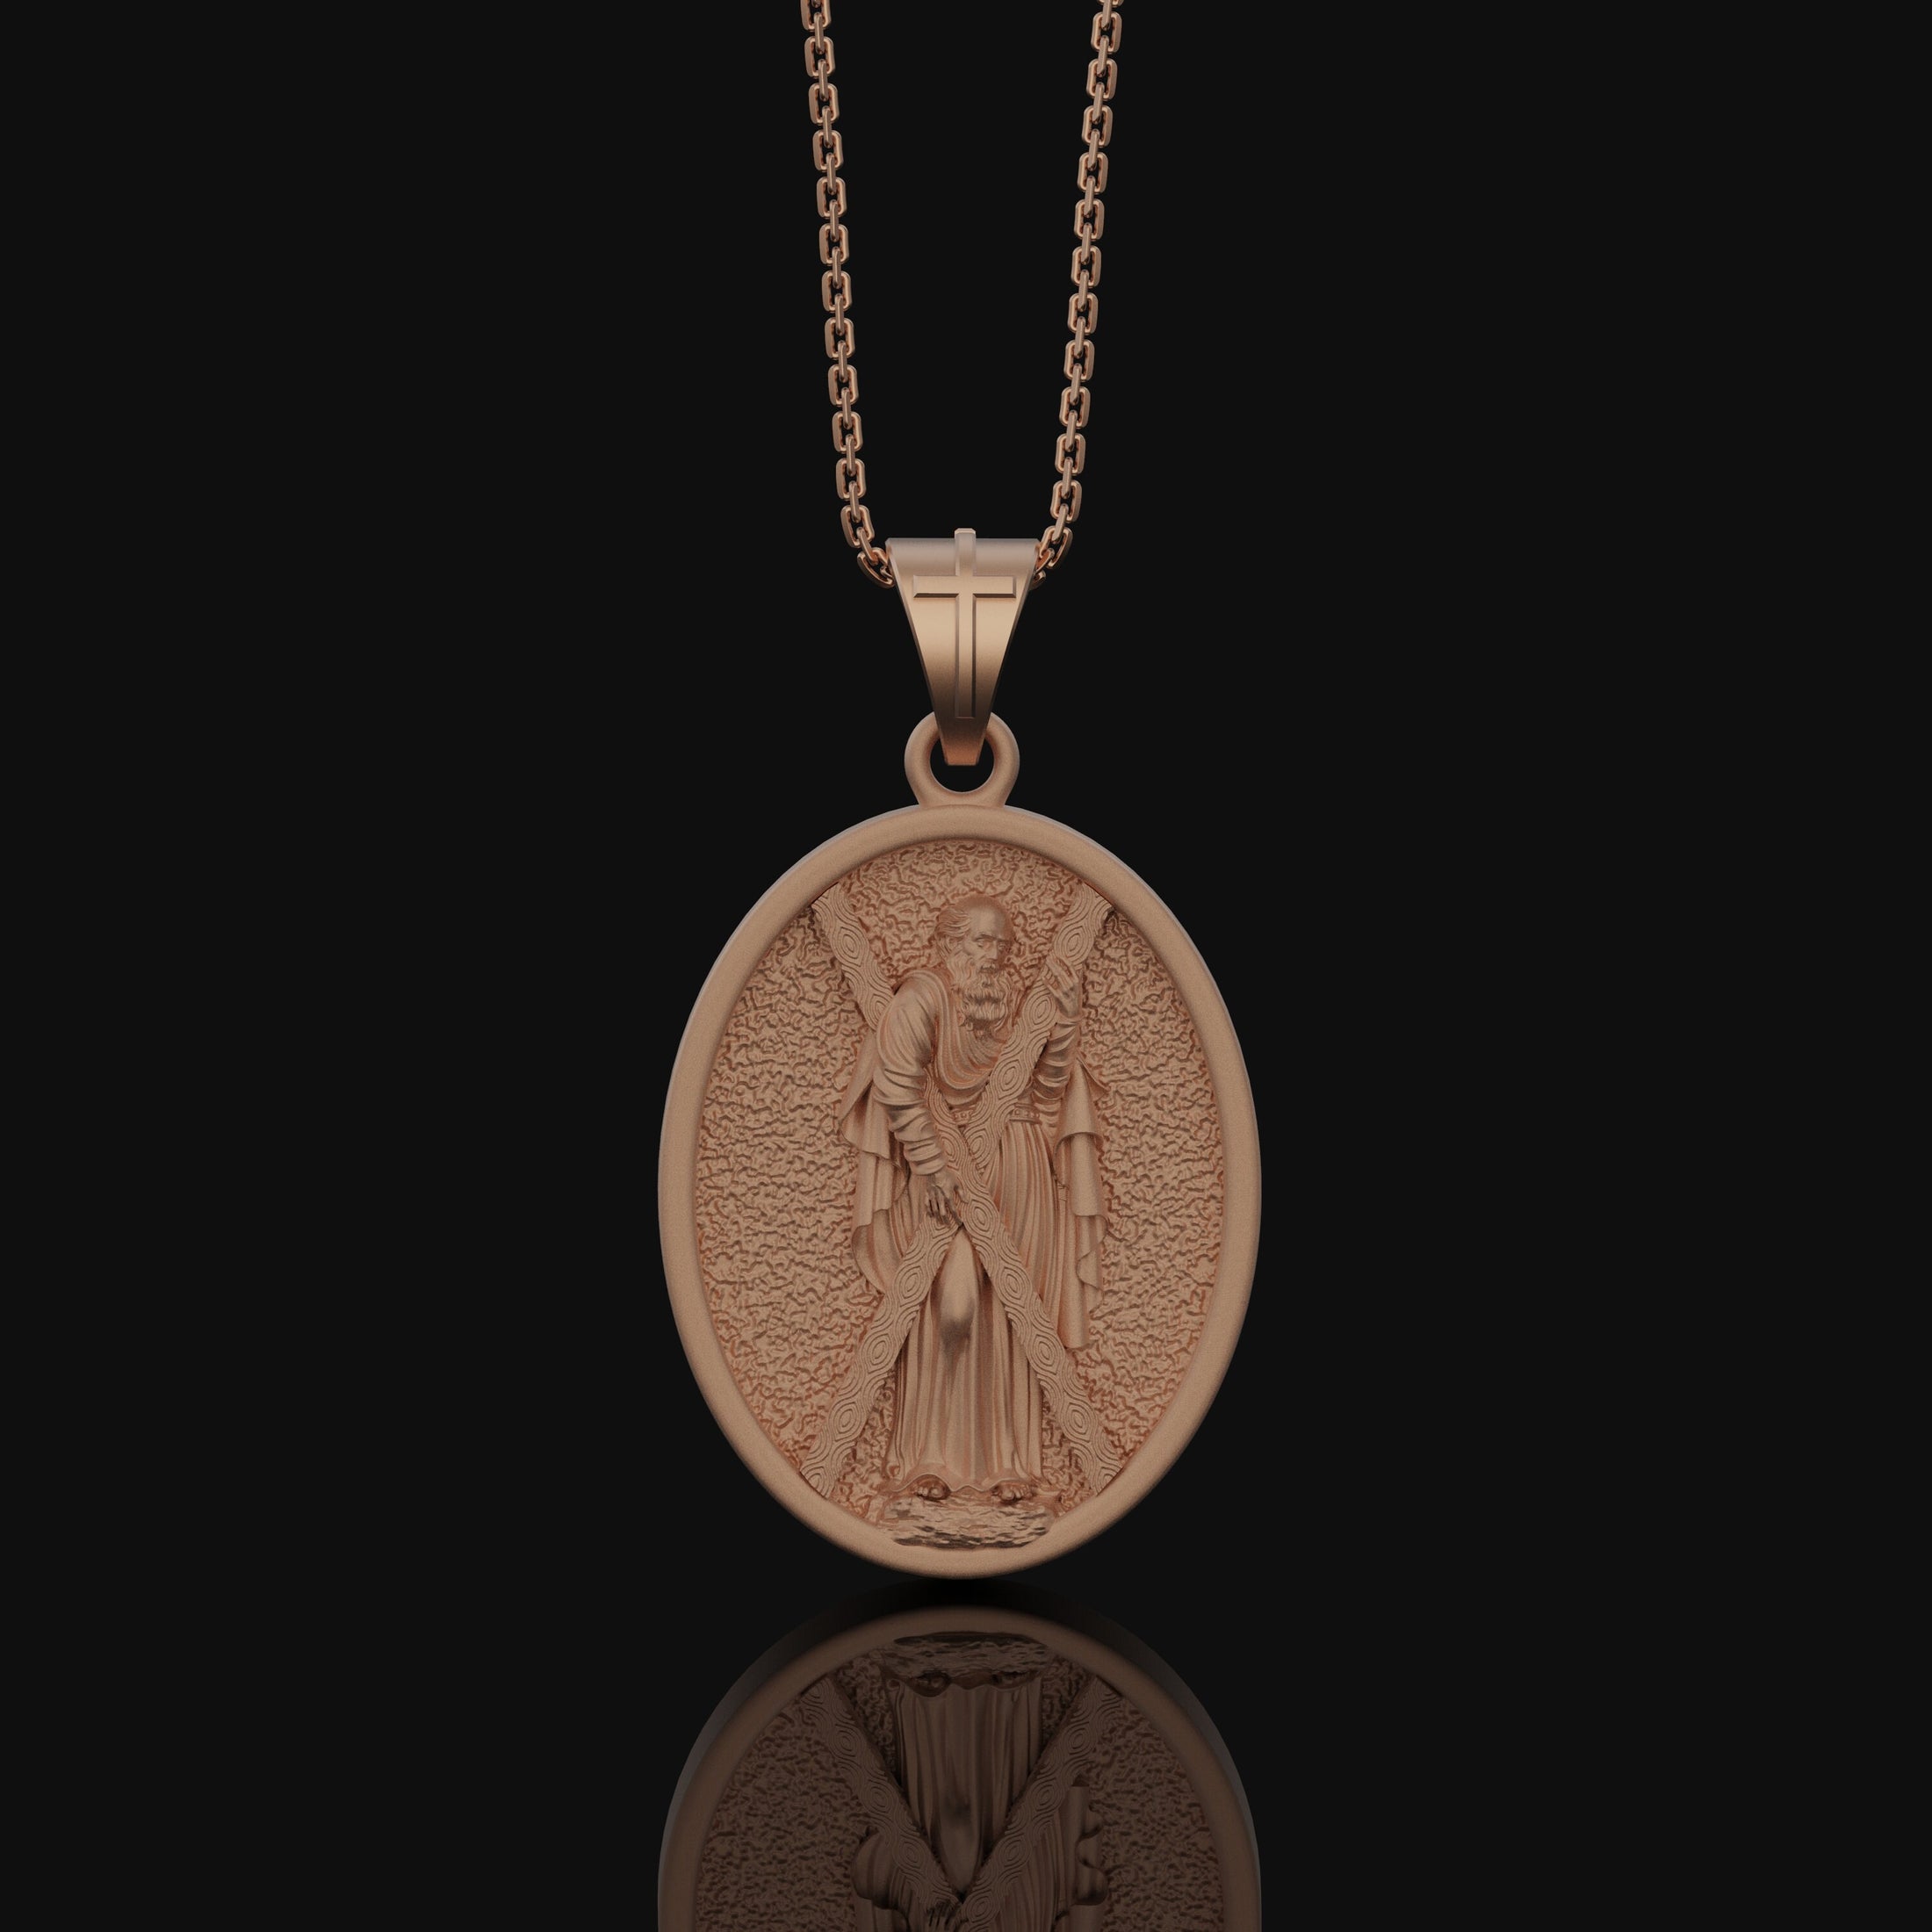 St Andrew Medal, Patron Saint Medal, Andrew The Apostle, Religious Medals Jewelry, Catholic Necklace, Confirmation Gift Rose Gold Matte